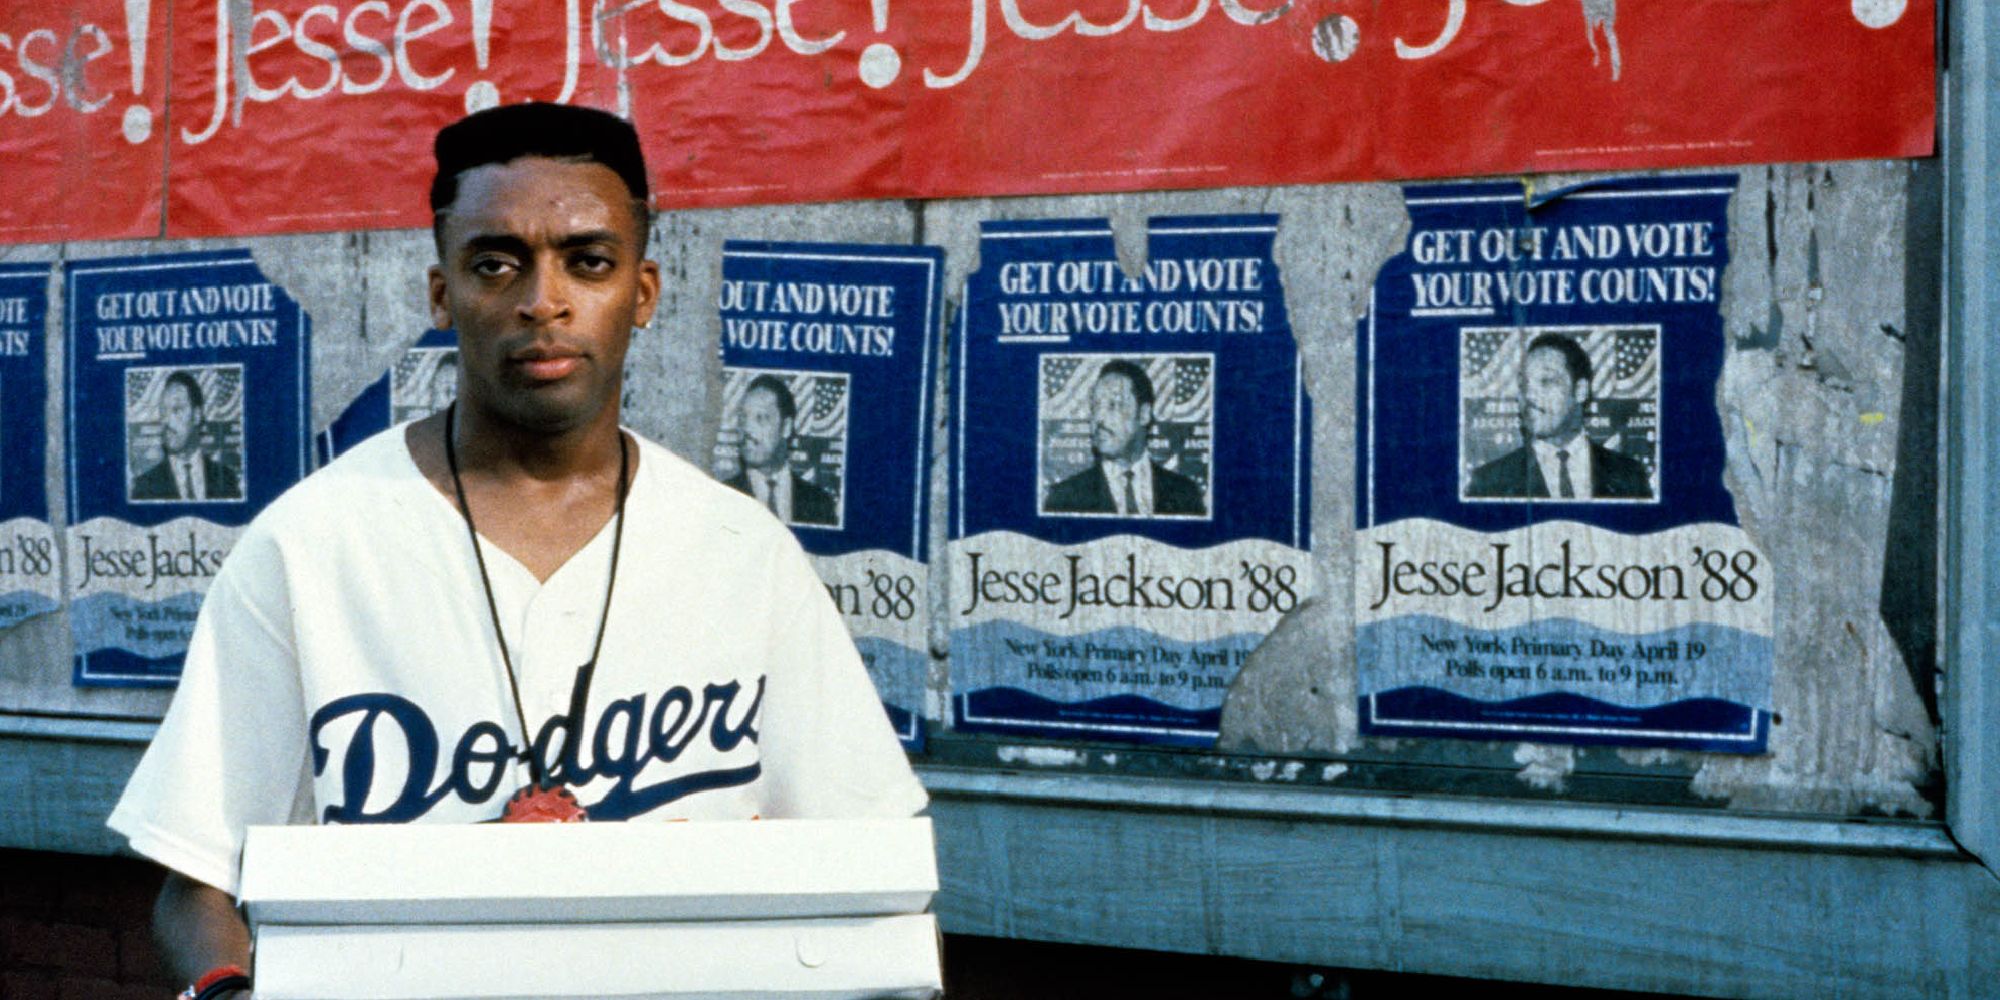 Spike Lee - Do the right thing